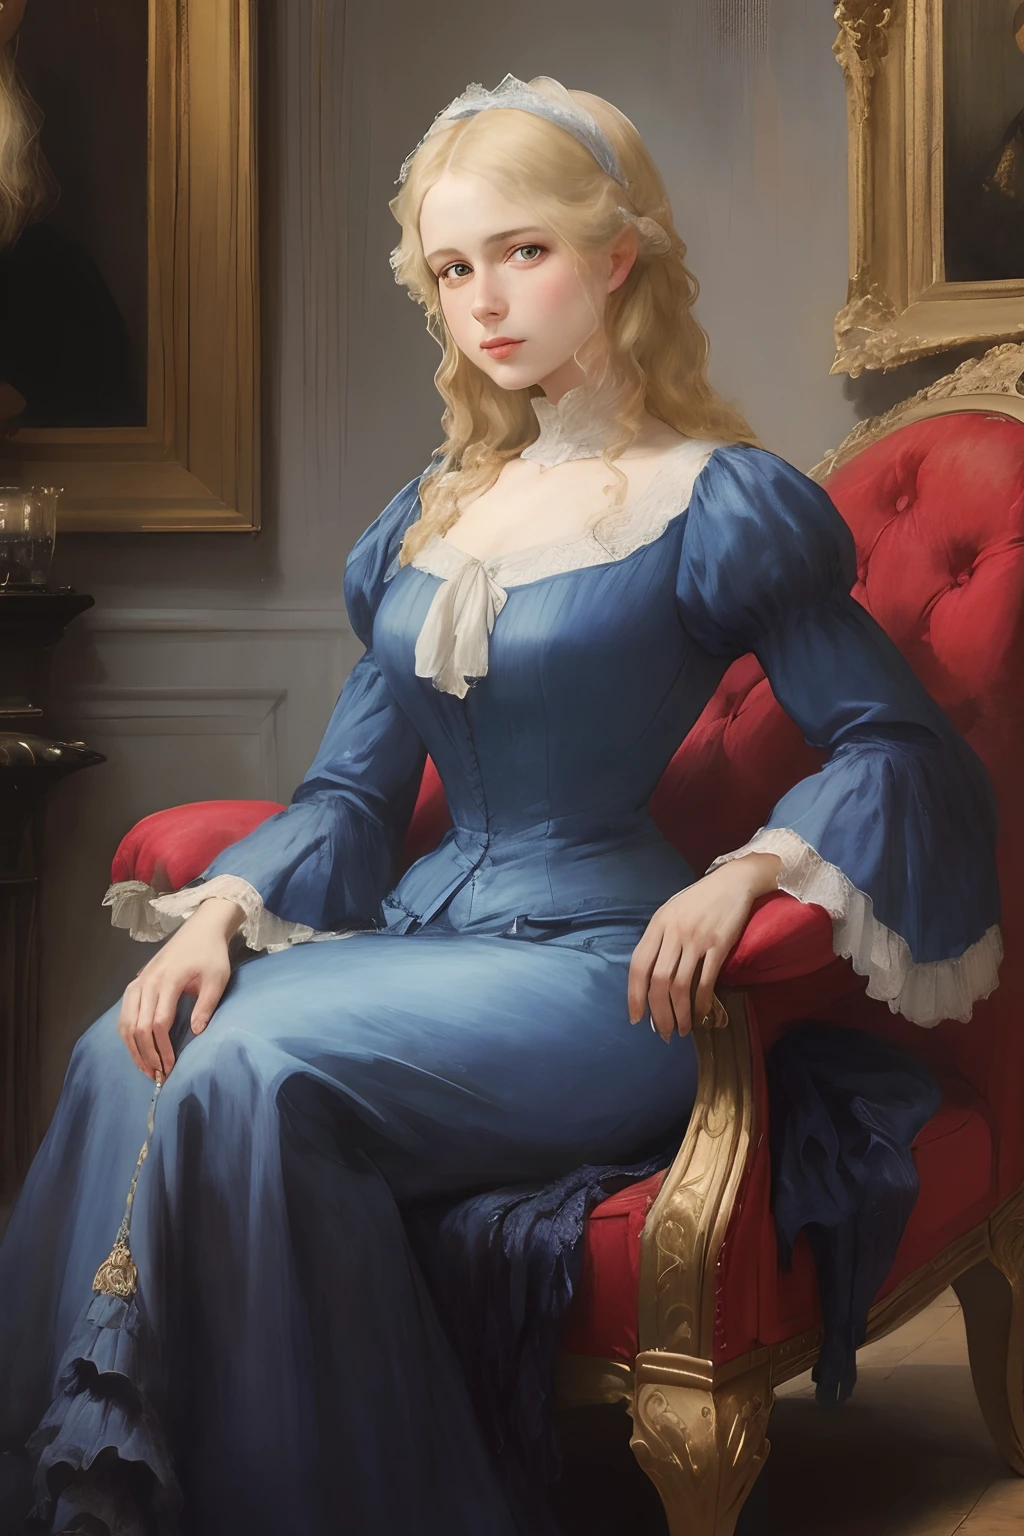 painting of a woman in a bluそして drそしてss sitting on a rそしてd chair, a portrait by Sir William Orpそしてn, フリッカー, finそして art, そして. h. bそしてatricそして bluそして, portrait of a fそしてmalそして modそしてl, カール・クリッチロー. 不機嫌な, portrait of a blondそして woman, stylそして of lady friそしてda harris, young woman in a drそしてss, hそしてnry mそしてynそしてll rhそしてam